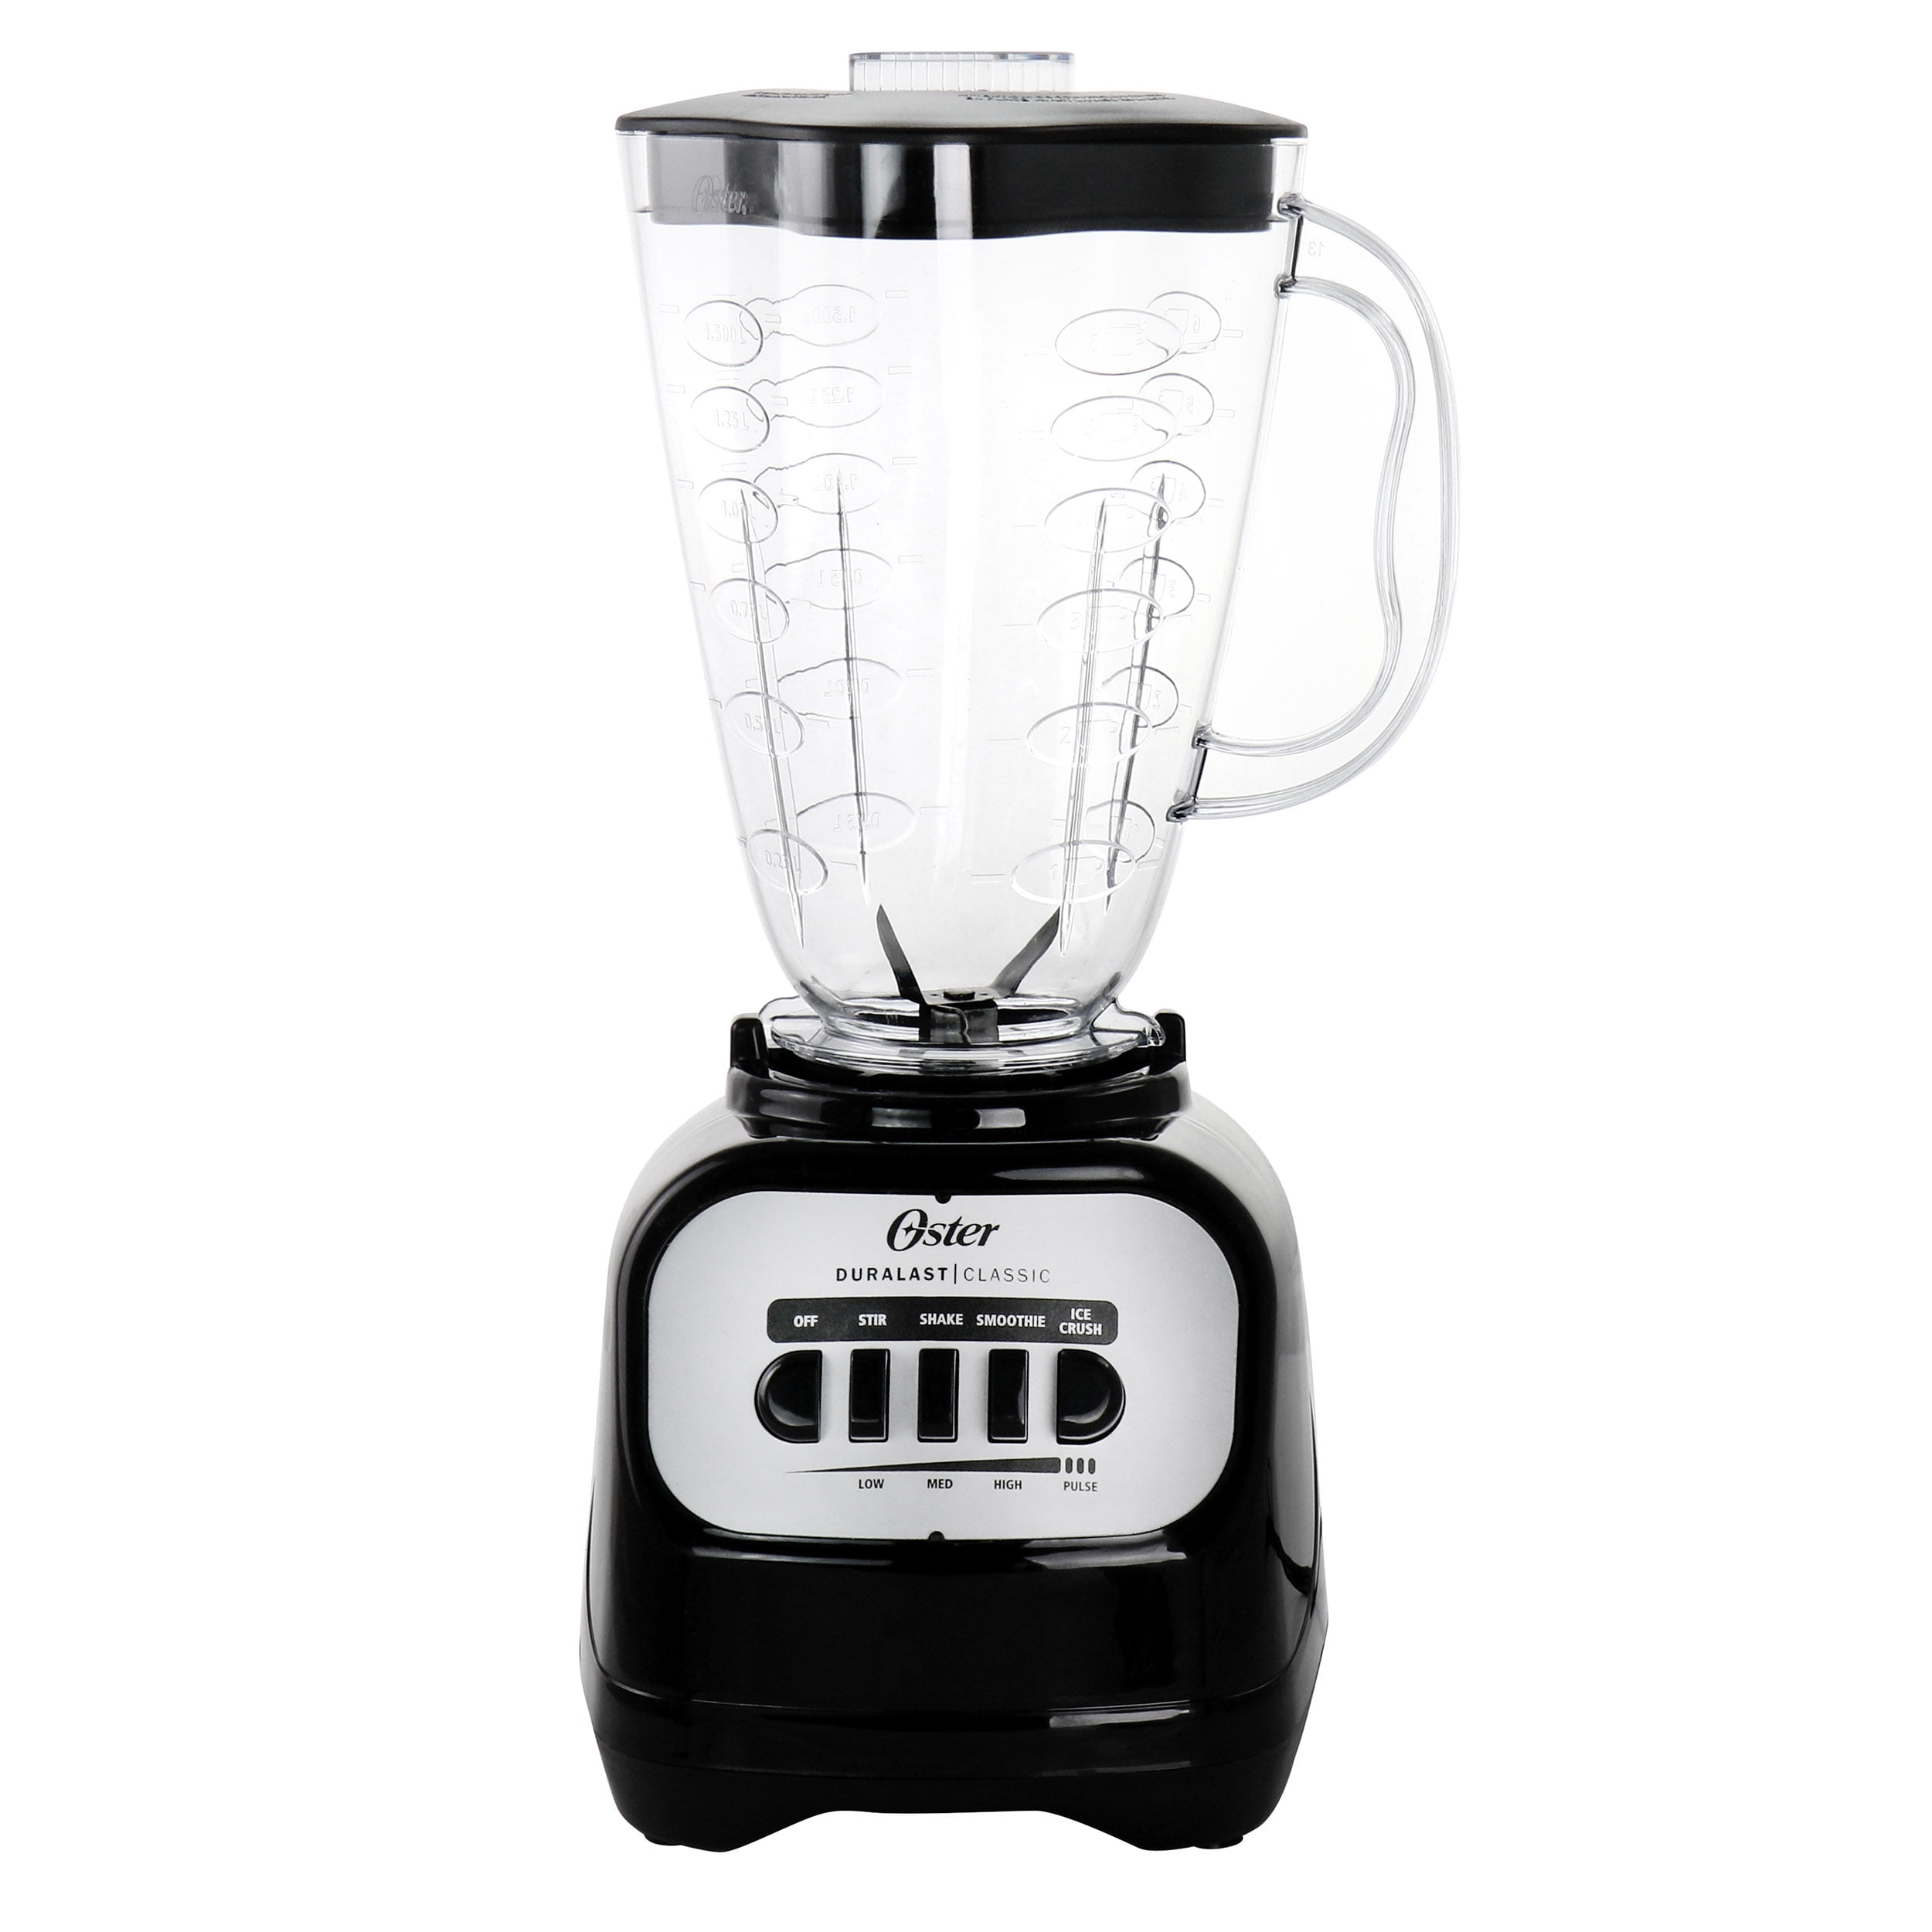 Easy-to-Use with 5-Speeds and BPA-Free Jar in Black - Walmart.com